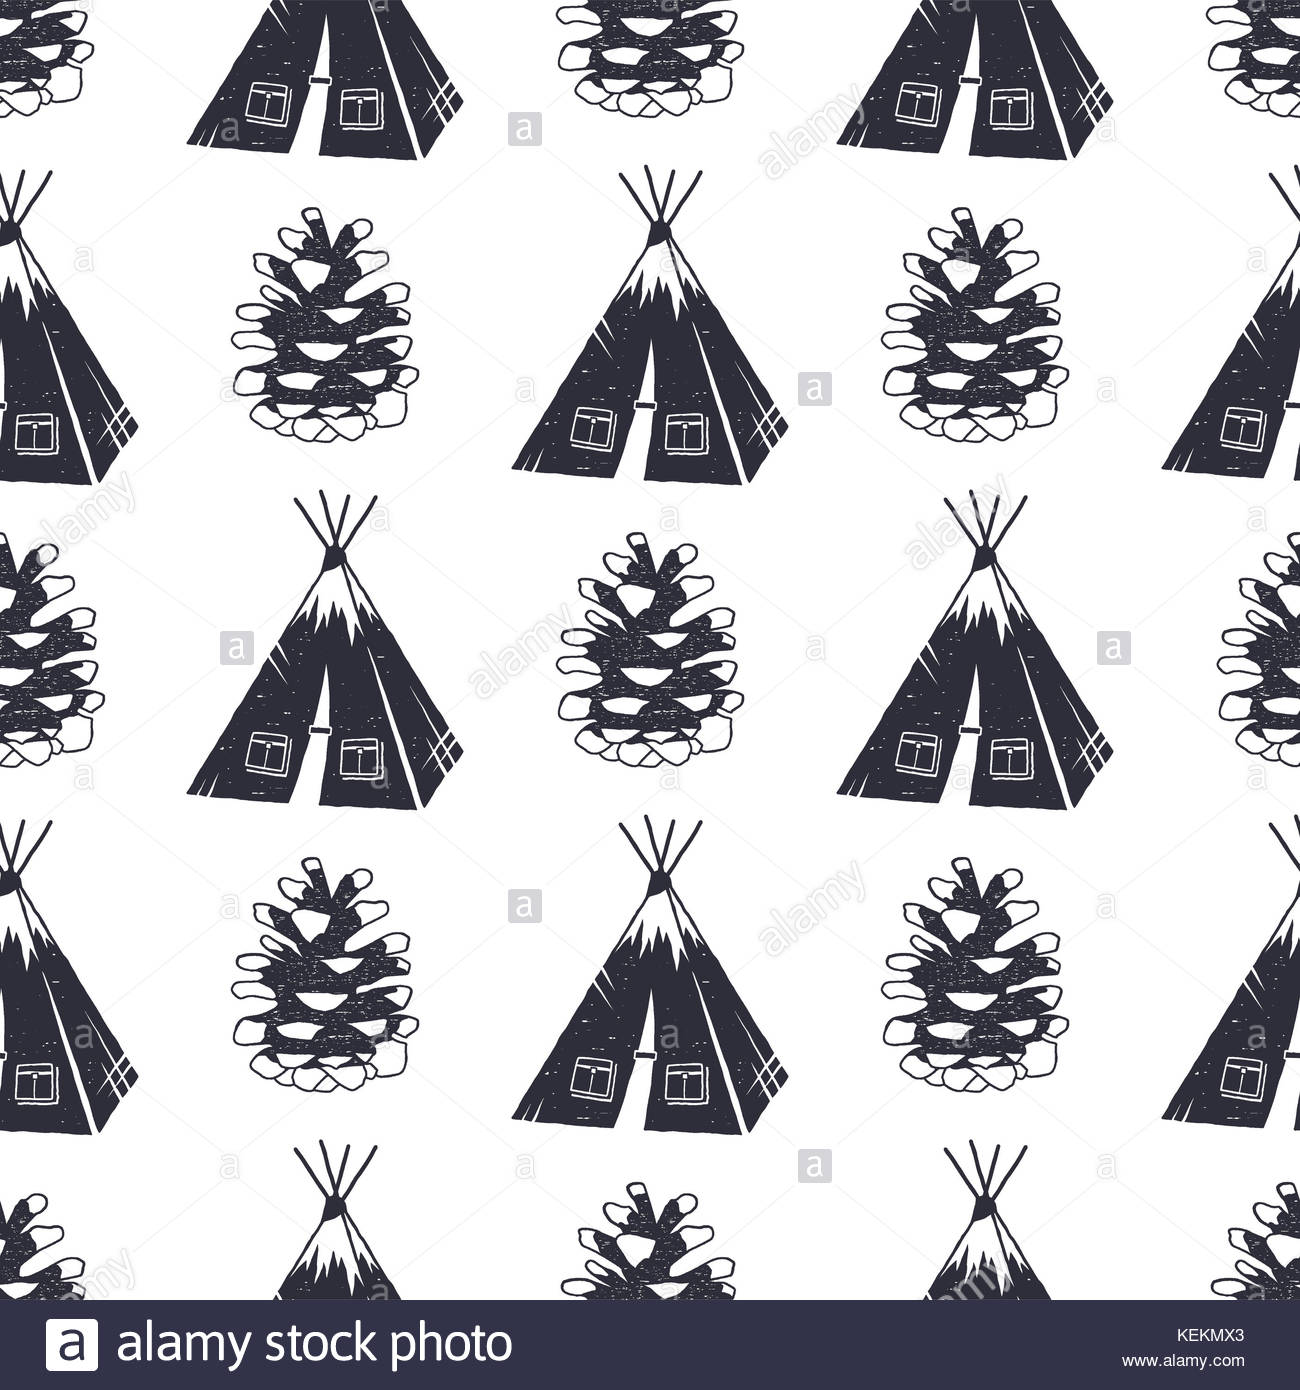 Vintage Hand Drawn Camping And Forest Pattern Design Seamless